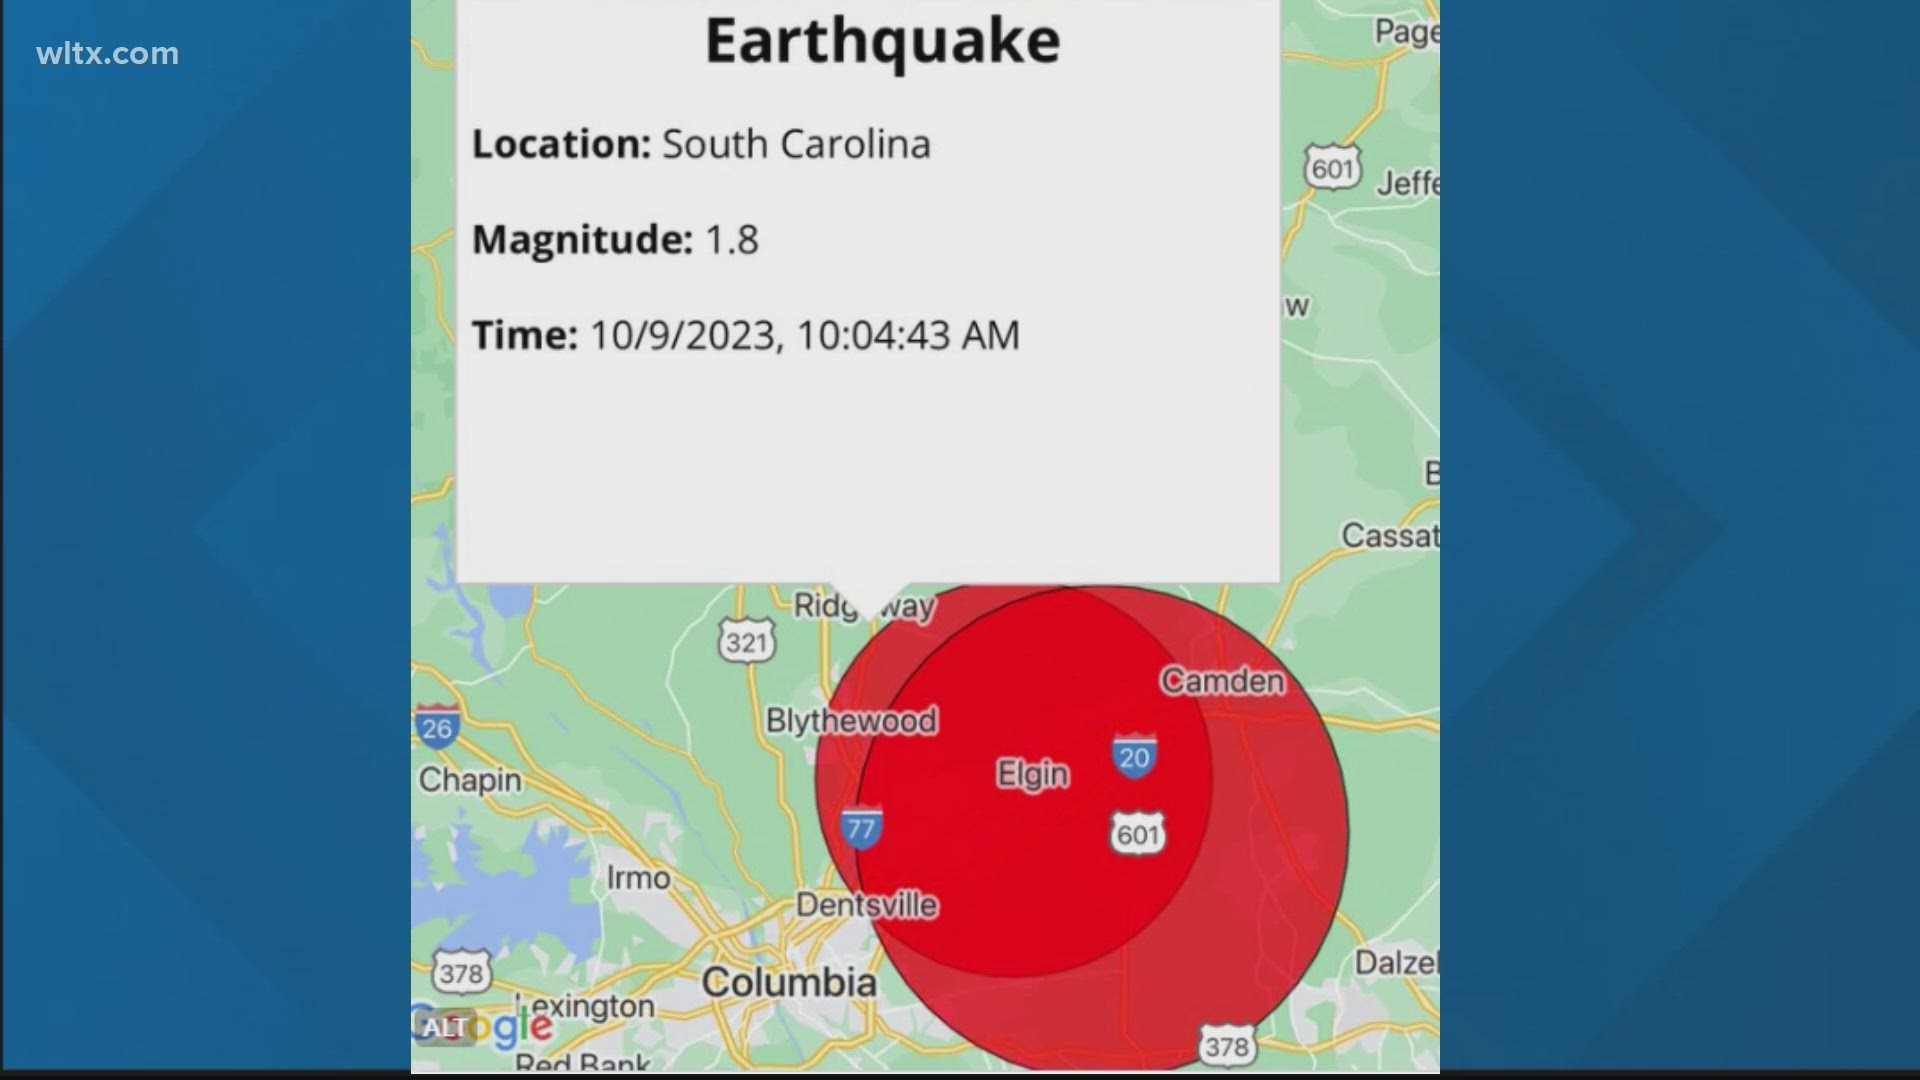 The US Geological Survey (USGS) reports a small earthquake occurring around 10:04 a.m. neat Elgin, South Carolina.